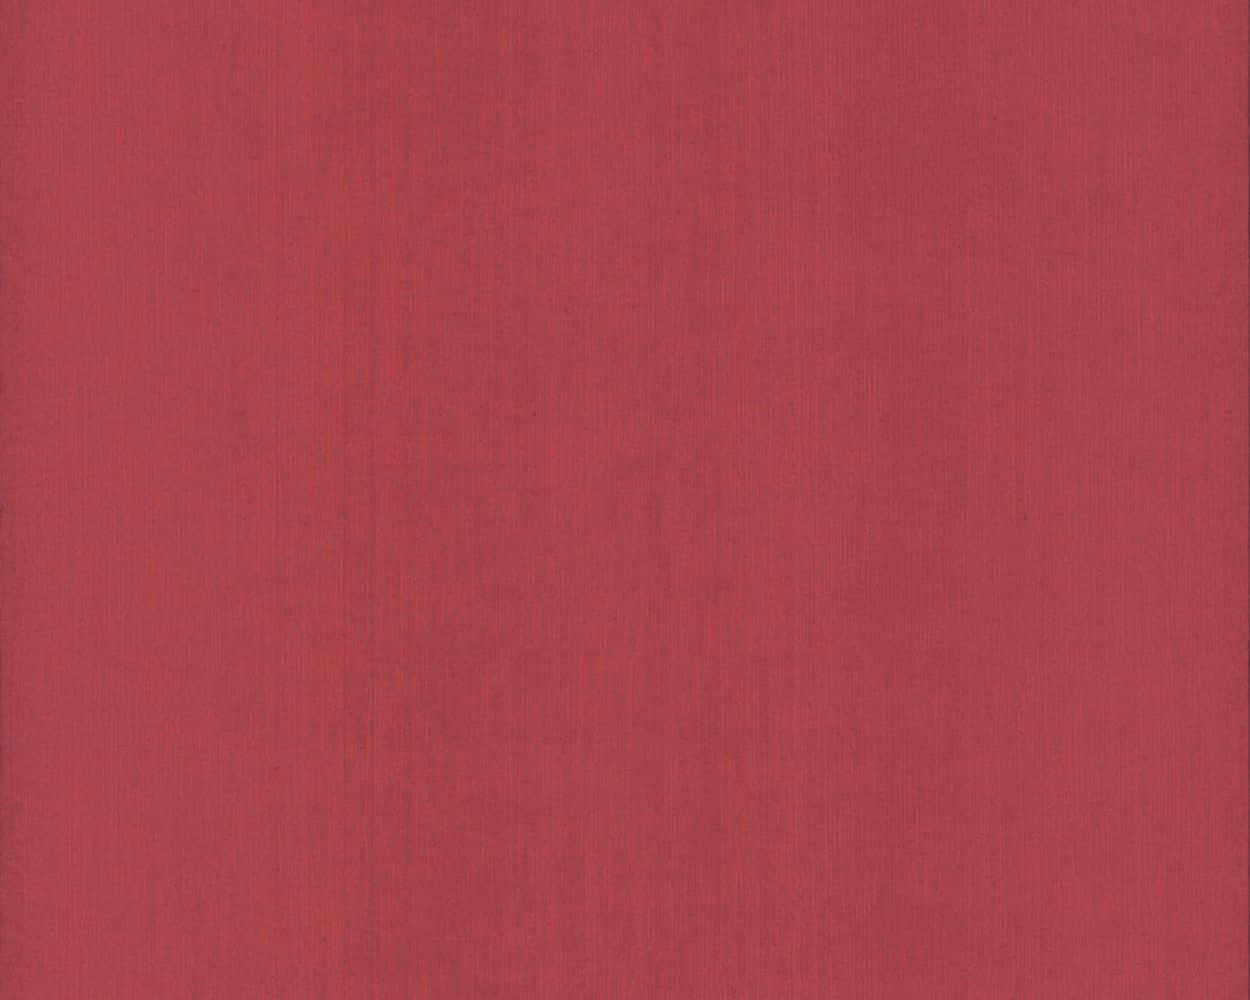 A Red Background With A Smooth Texture